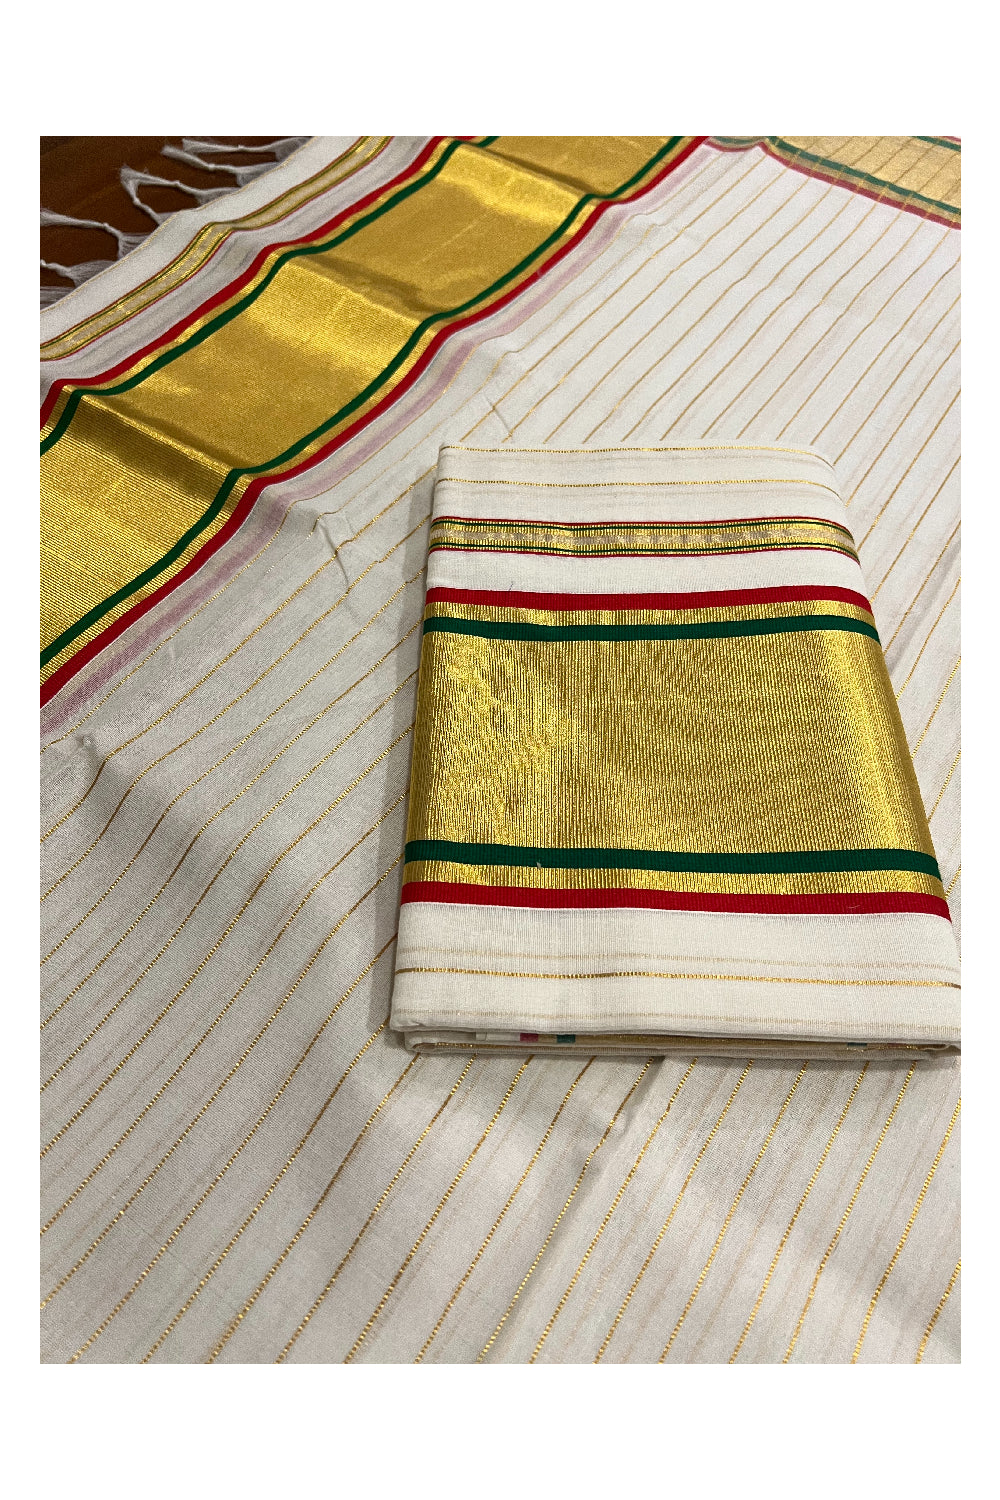 Southloom Handloom Premium Set Mundu with Woven Lines Body with Red and Green Border 2.80 Mtrs